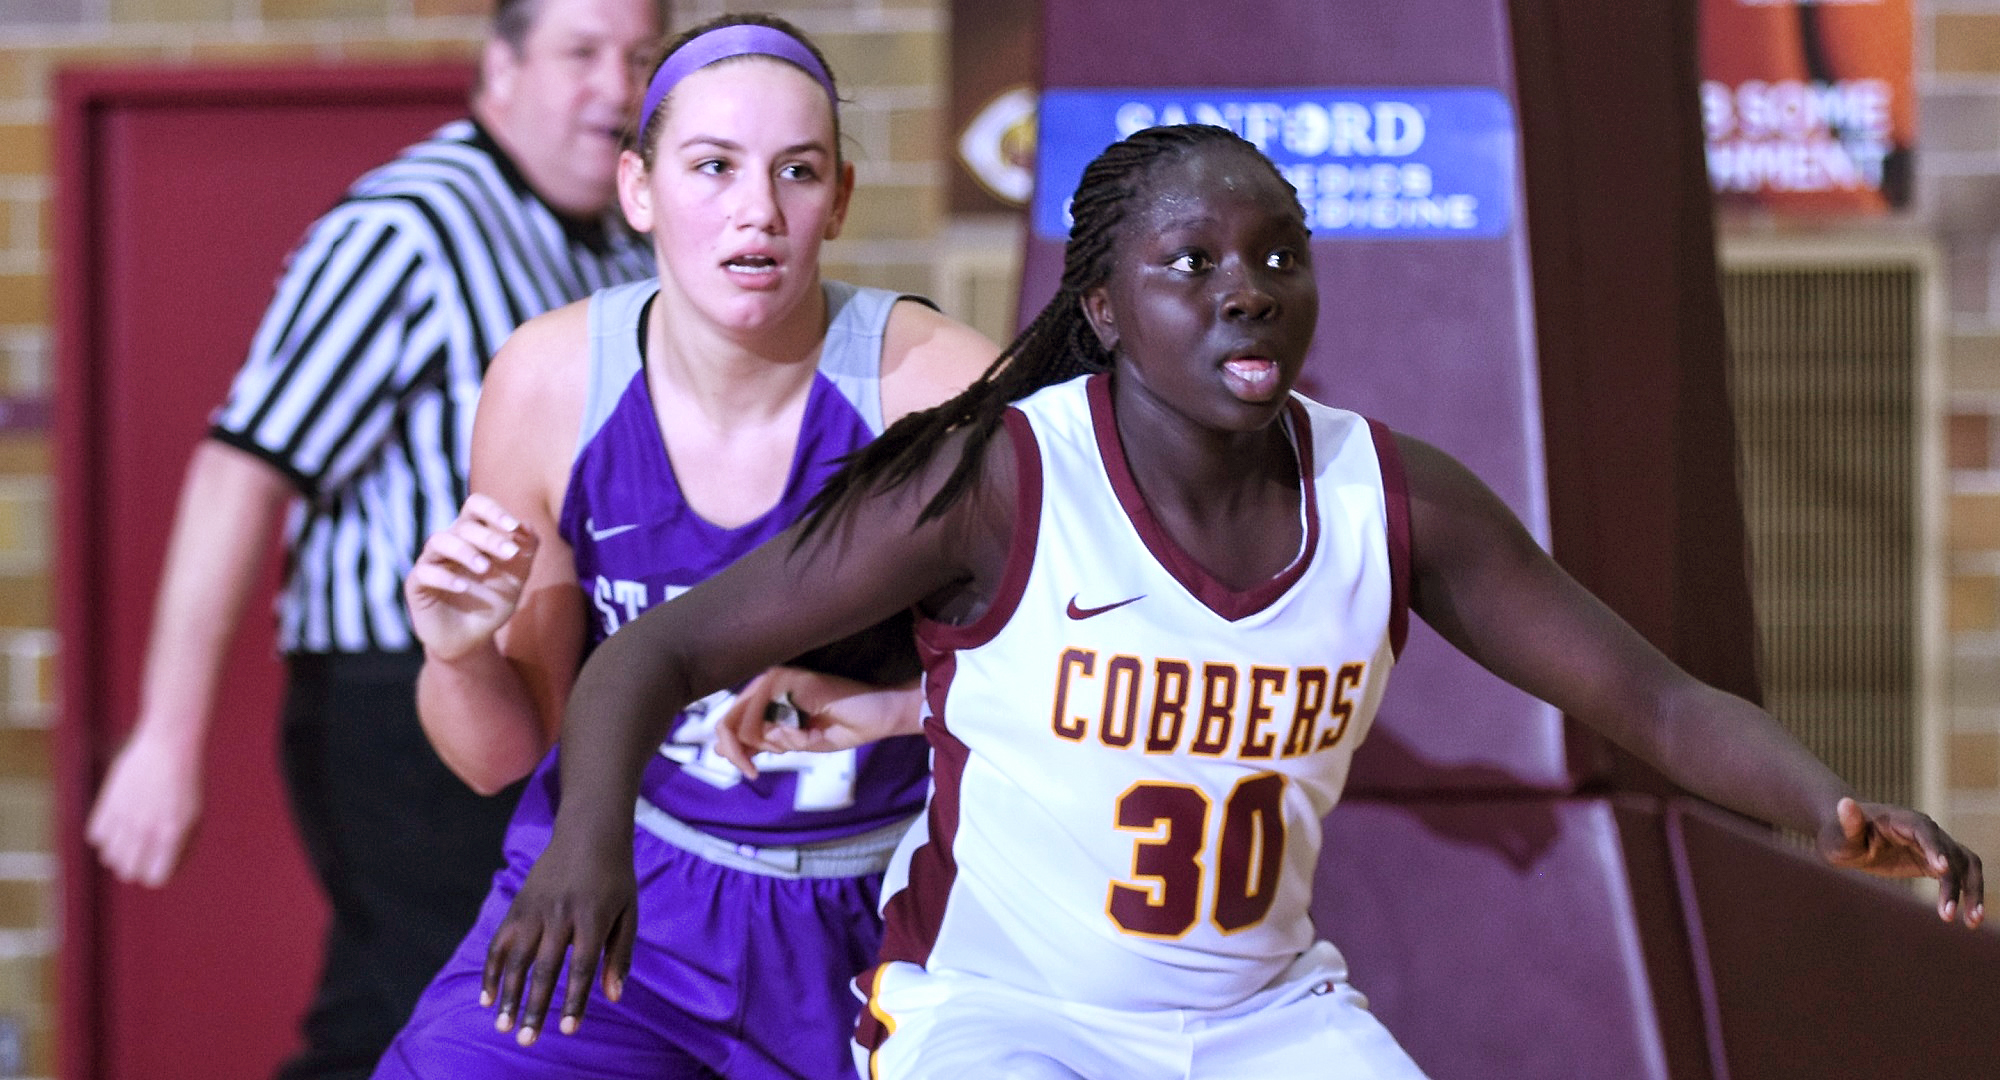 Sophomore Mary Sem posts up a St. Thomas player during the second half of the Cobbers' first game of 2020. Sem tied her career-high with 25 points.